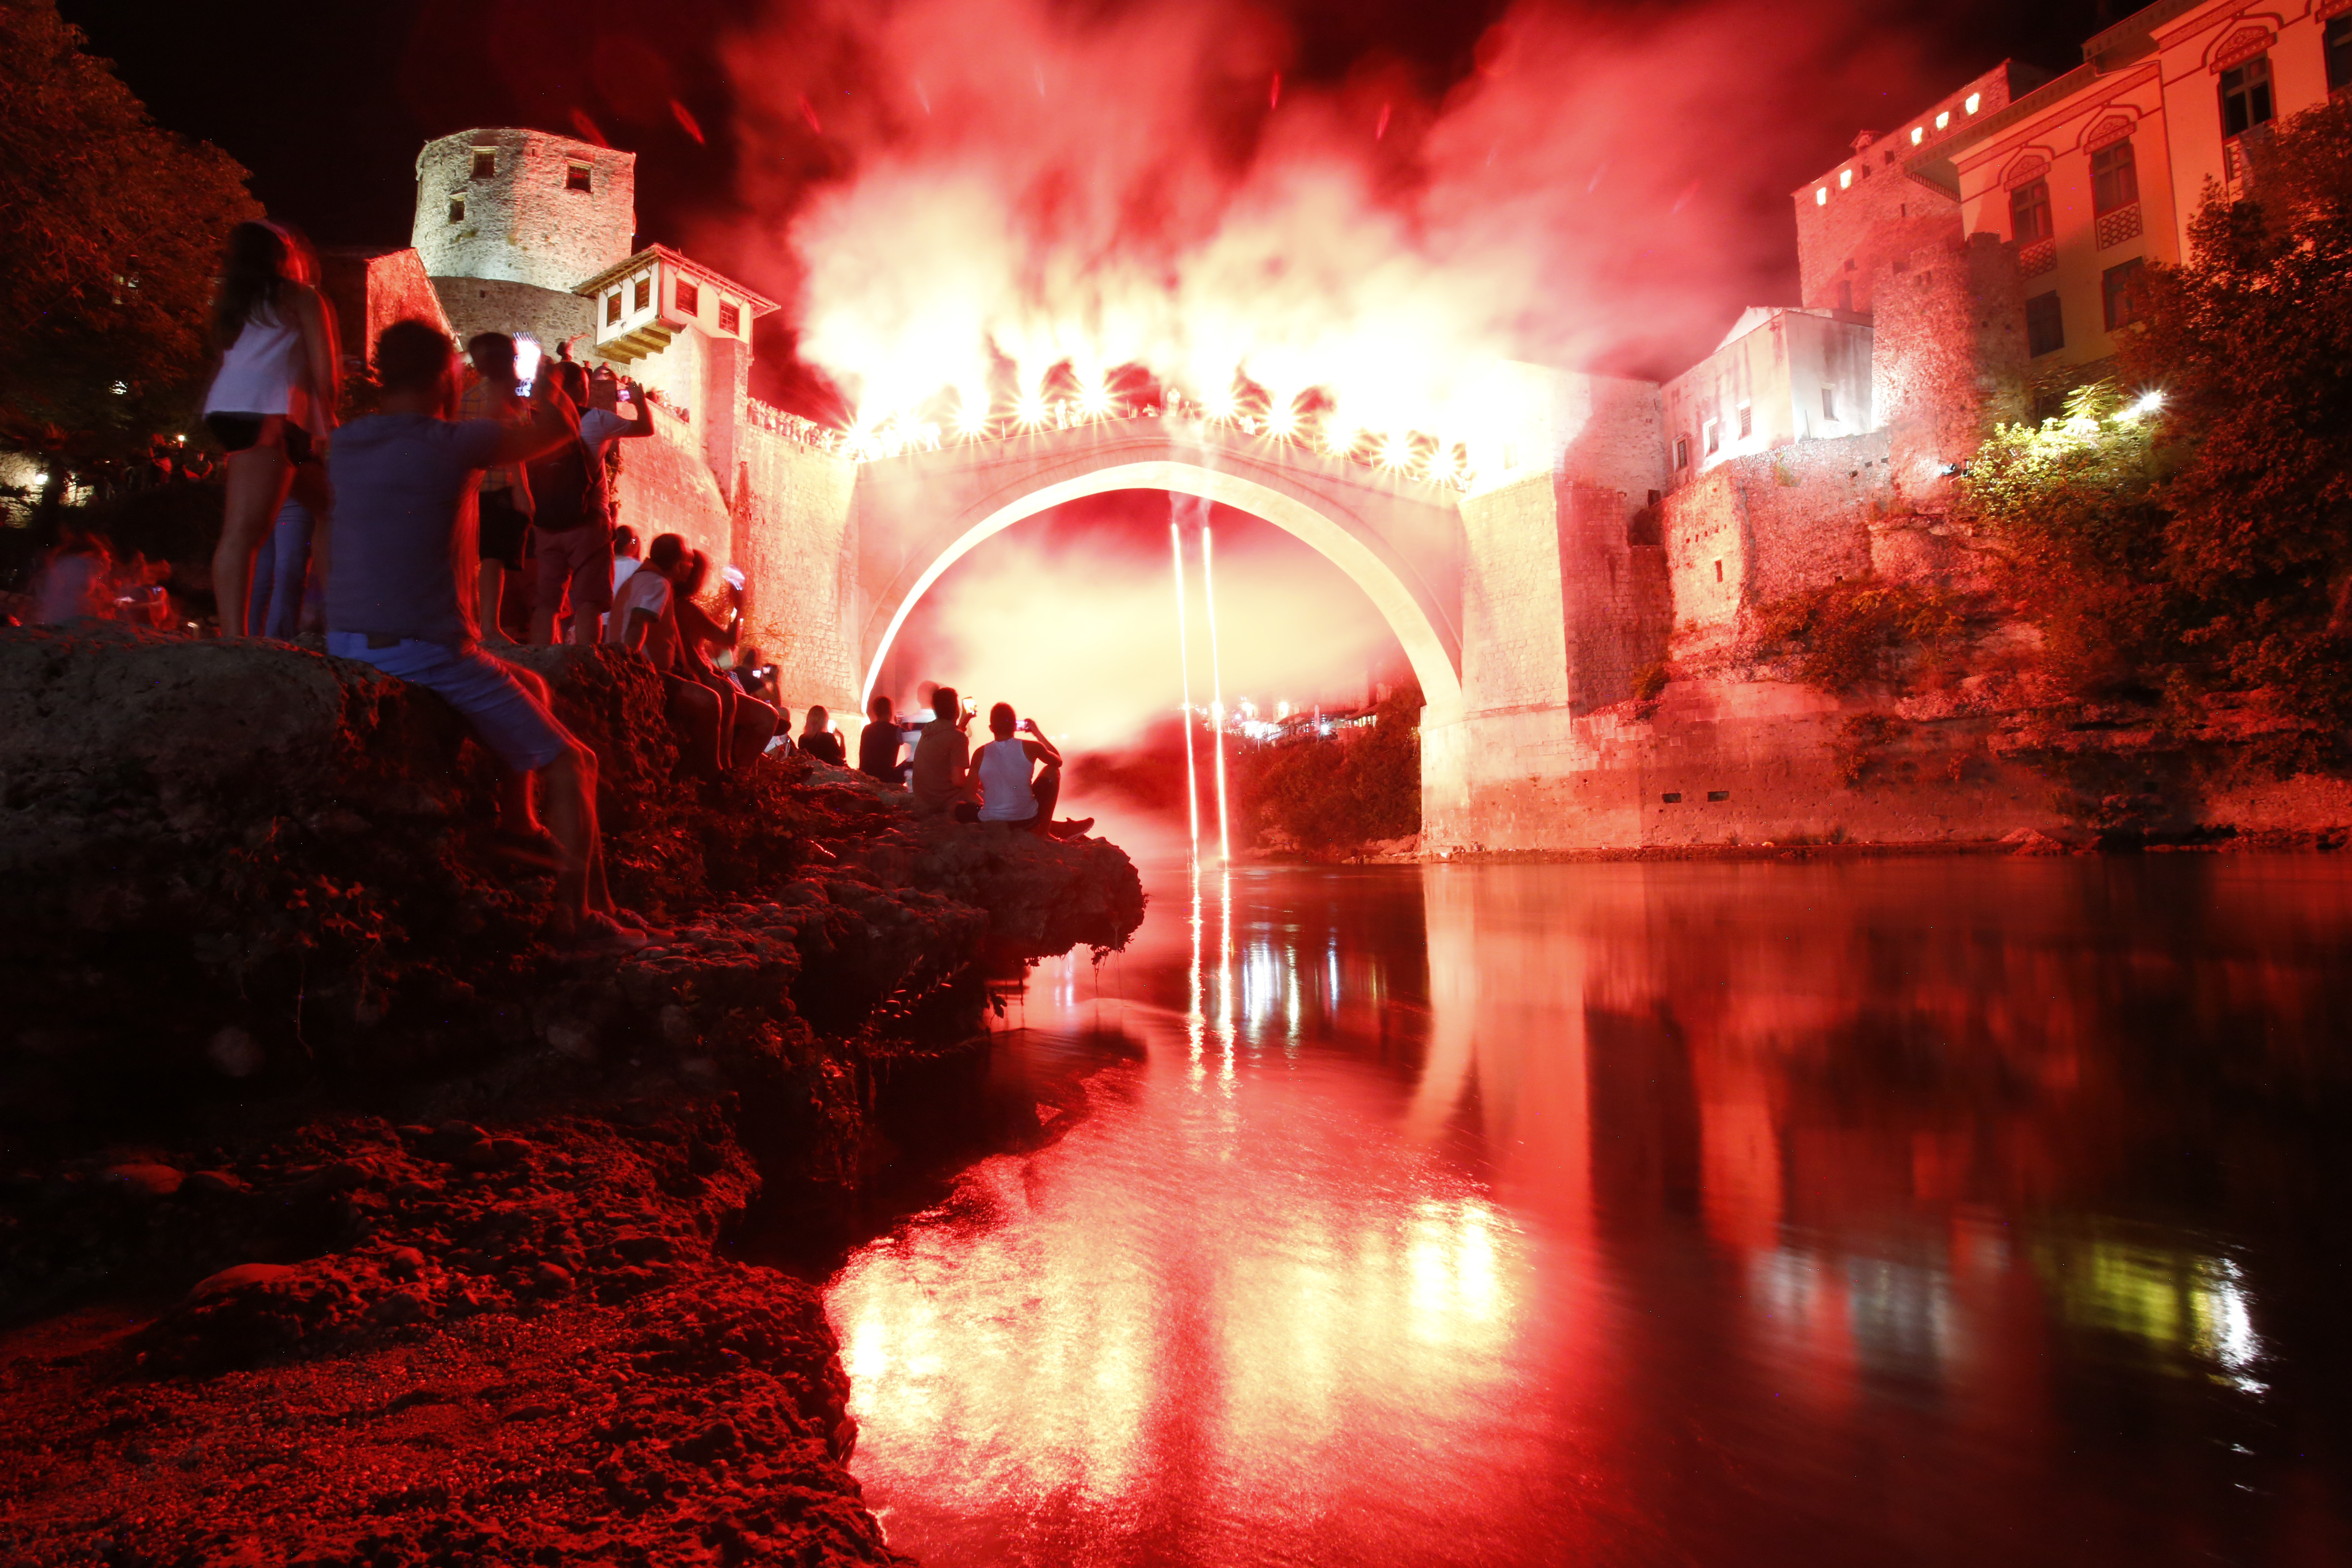 A Bosnian jumper, launches himself while holding burning torches, during traditional night jump from the Old Mostar Bridge, in Mostar, 140 kms south of Bosnian capital of Sarajevo, Sunday, July 30, 2017. A total of 41 divers from Bosnia and neighbouring countries competed diving from the 25 meter (82 feet) high Old Mostar Bridge into the Neretva River. (AP Photo/Amel Emric)